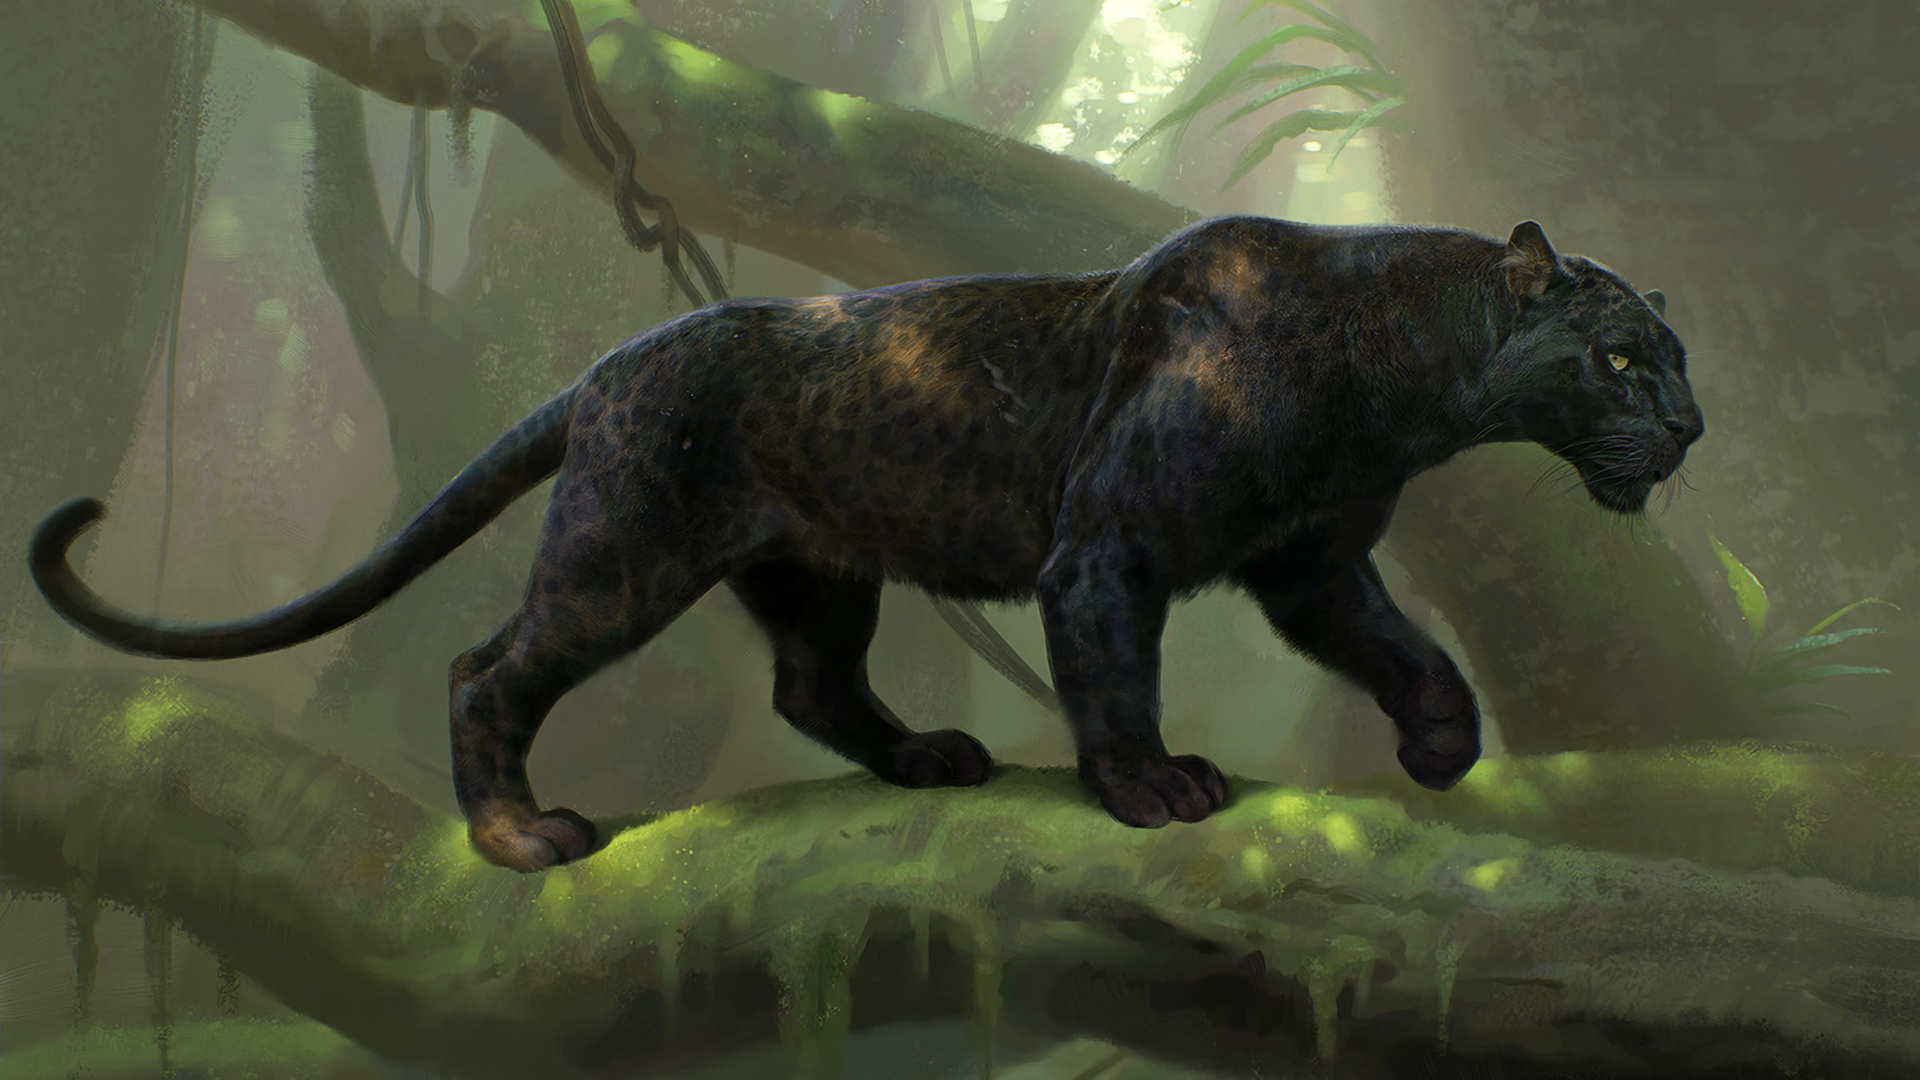 Download Bagheera Black Panther Movie The Jungle Book (2016)  HD Wallpaper by Michael Kutsche